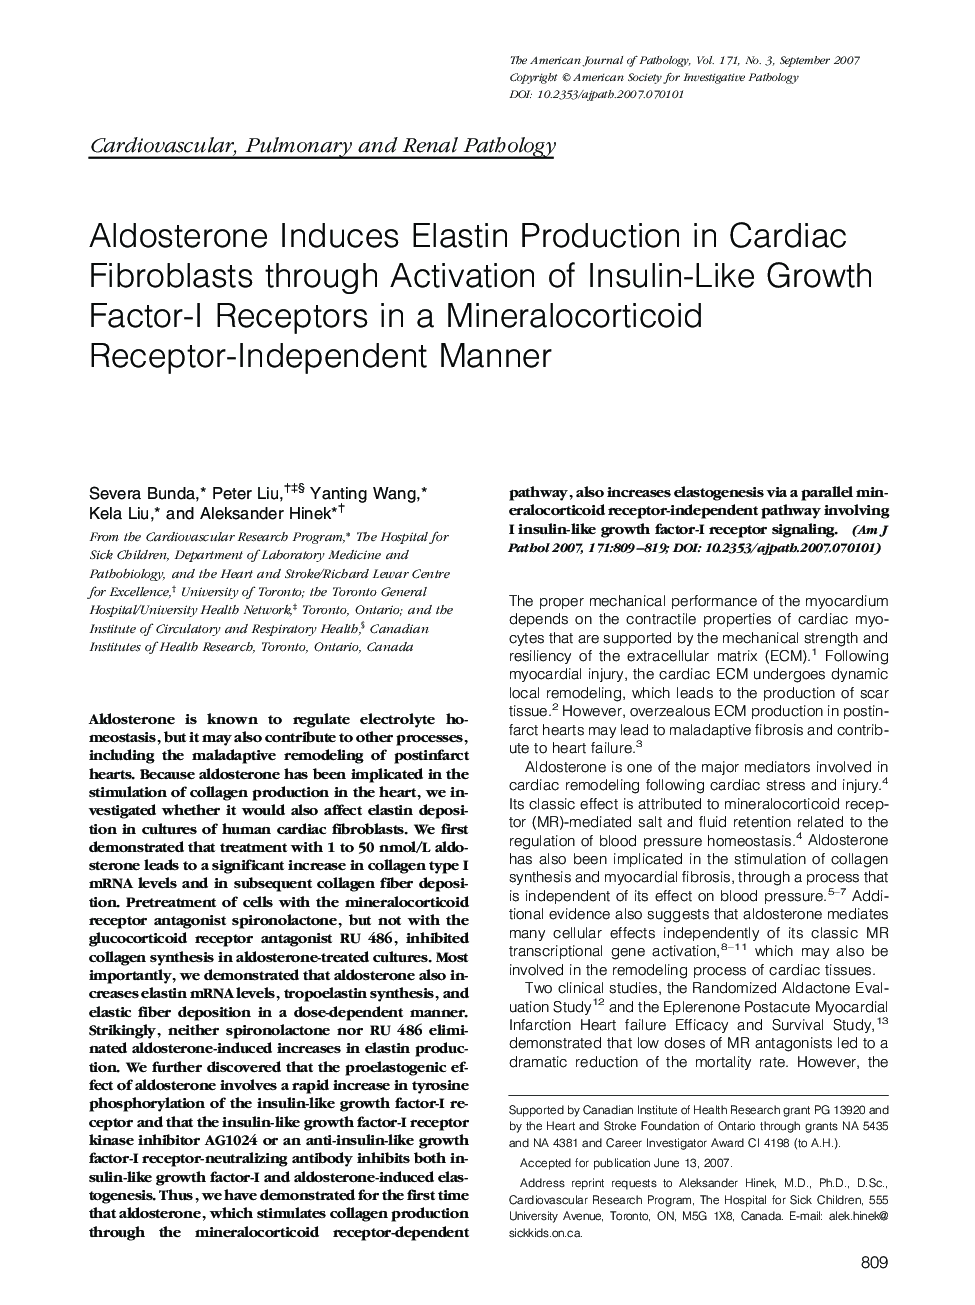 Regular ArticlesAldosterone Induces Elastin Production in Cardiac Fibroblasts through Activation of Insulin-Like Growth Factor-I Receptors in a Mineralocorticoid Receptor-Independent Manner